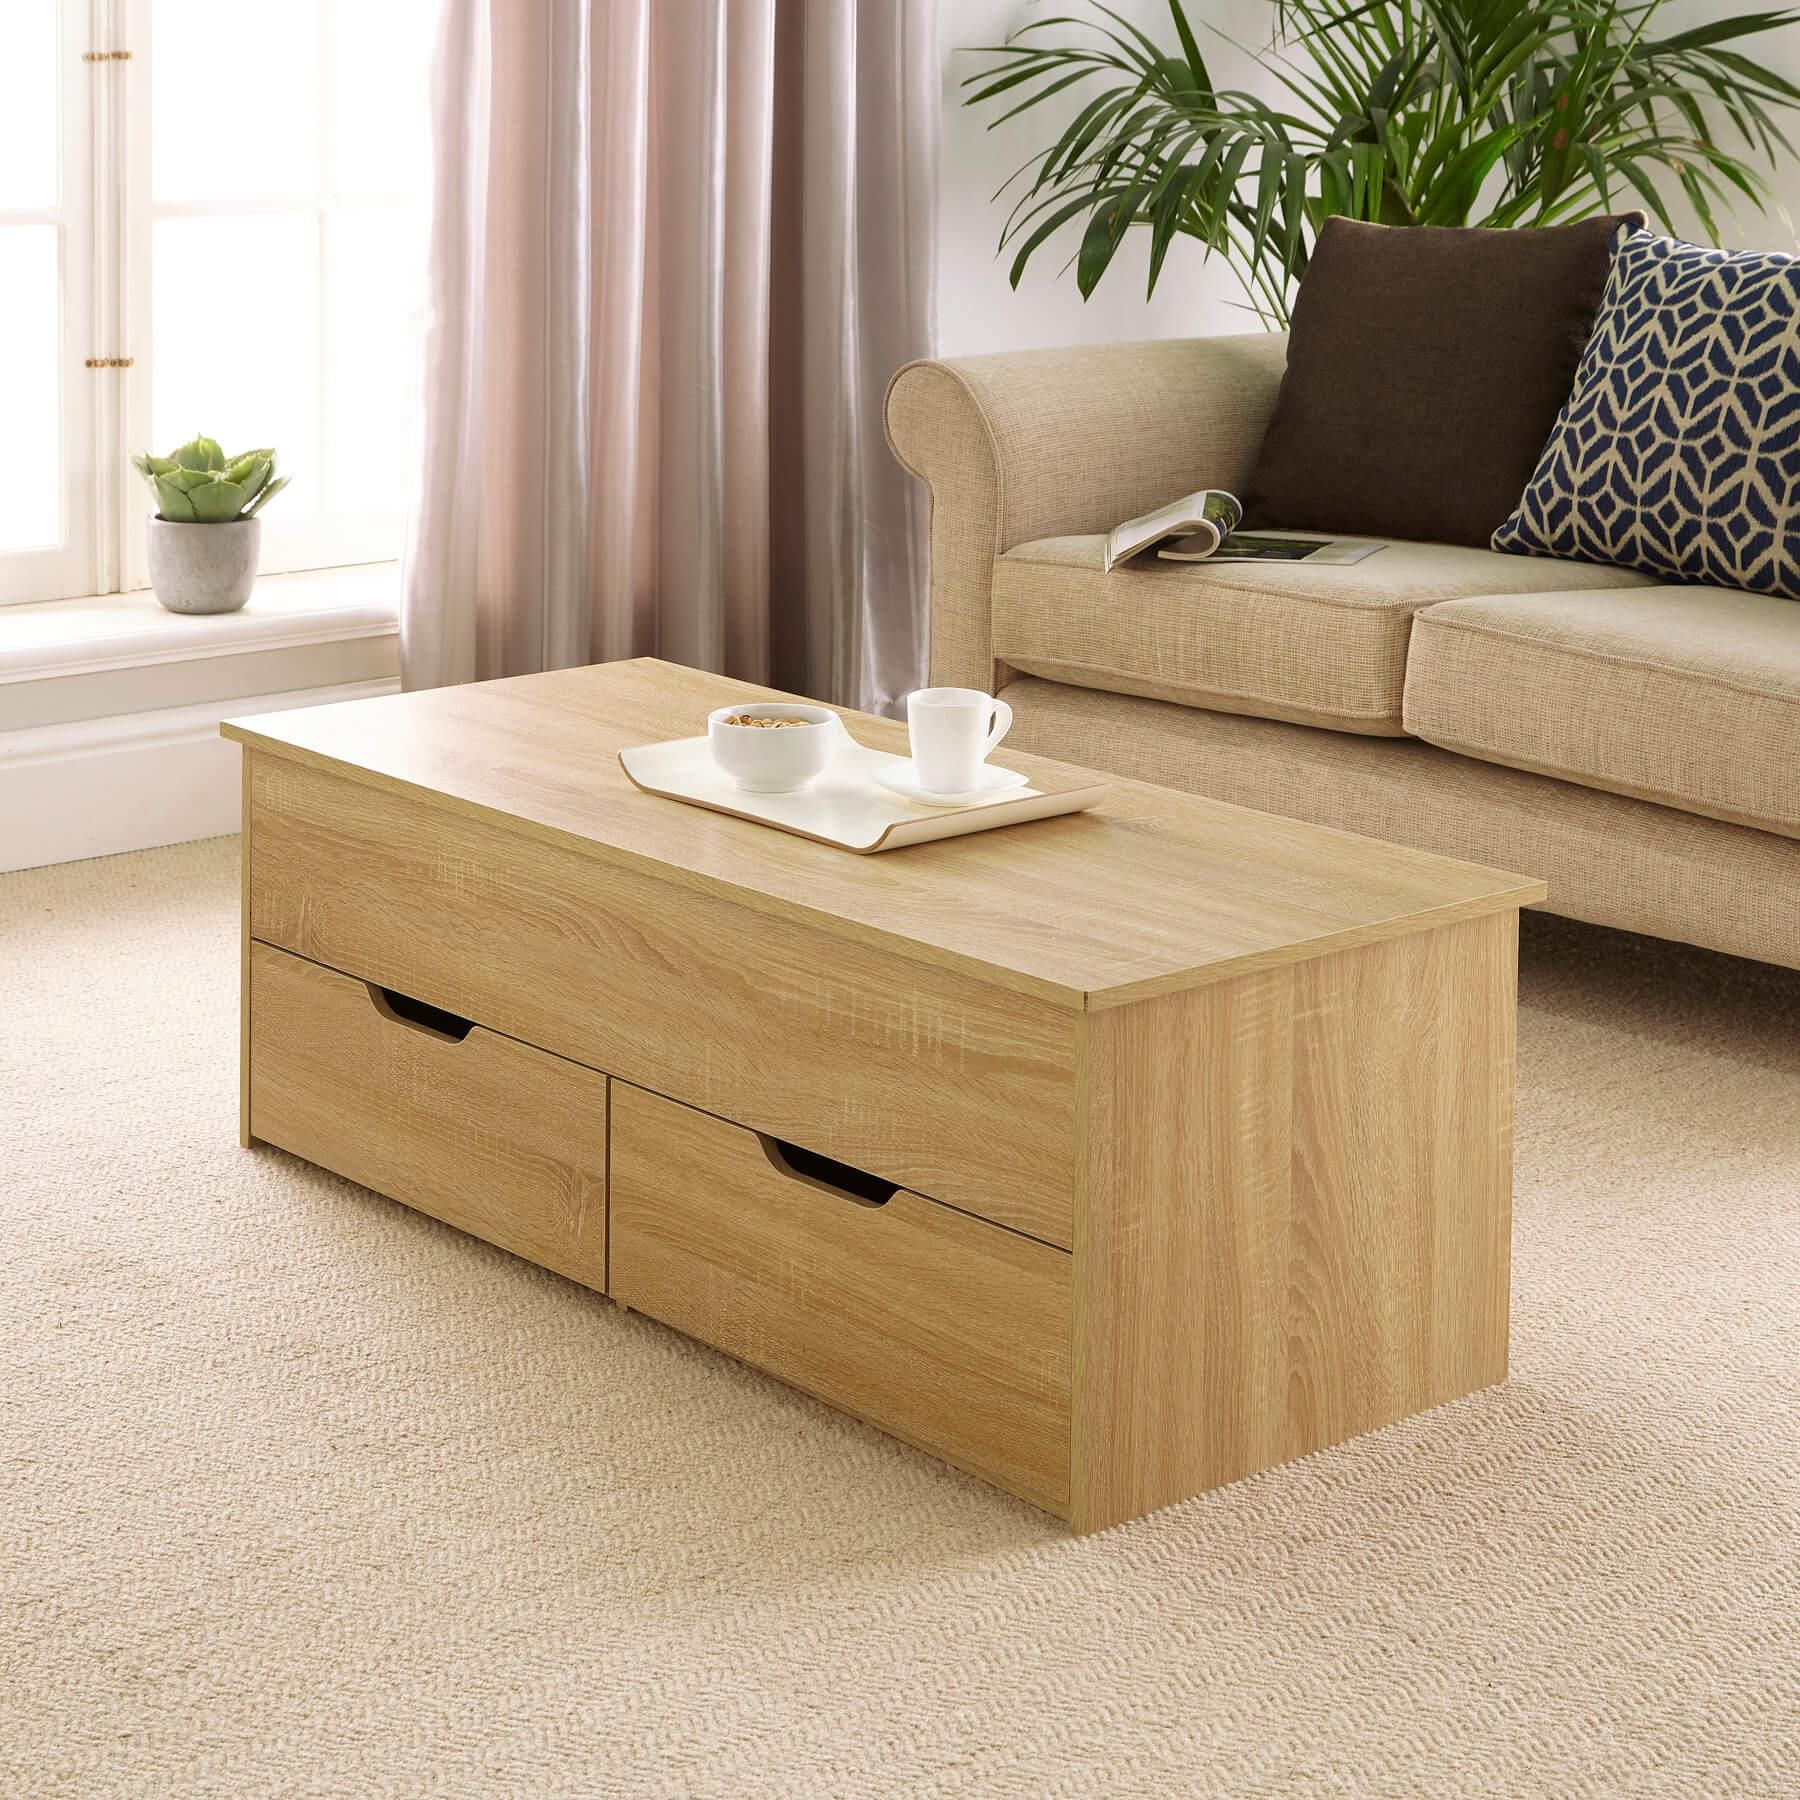 Oak Wooden Coffee Table With Lift Up Top And 2 Large Storage Drawers Pertaining To Lift Top Coffee Tables With Storage Drawers (View 6 of 20)